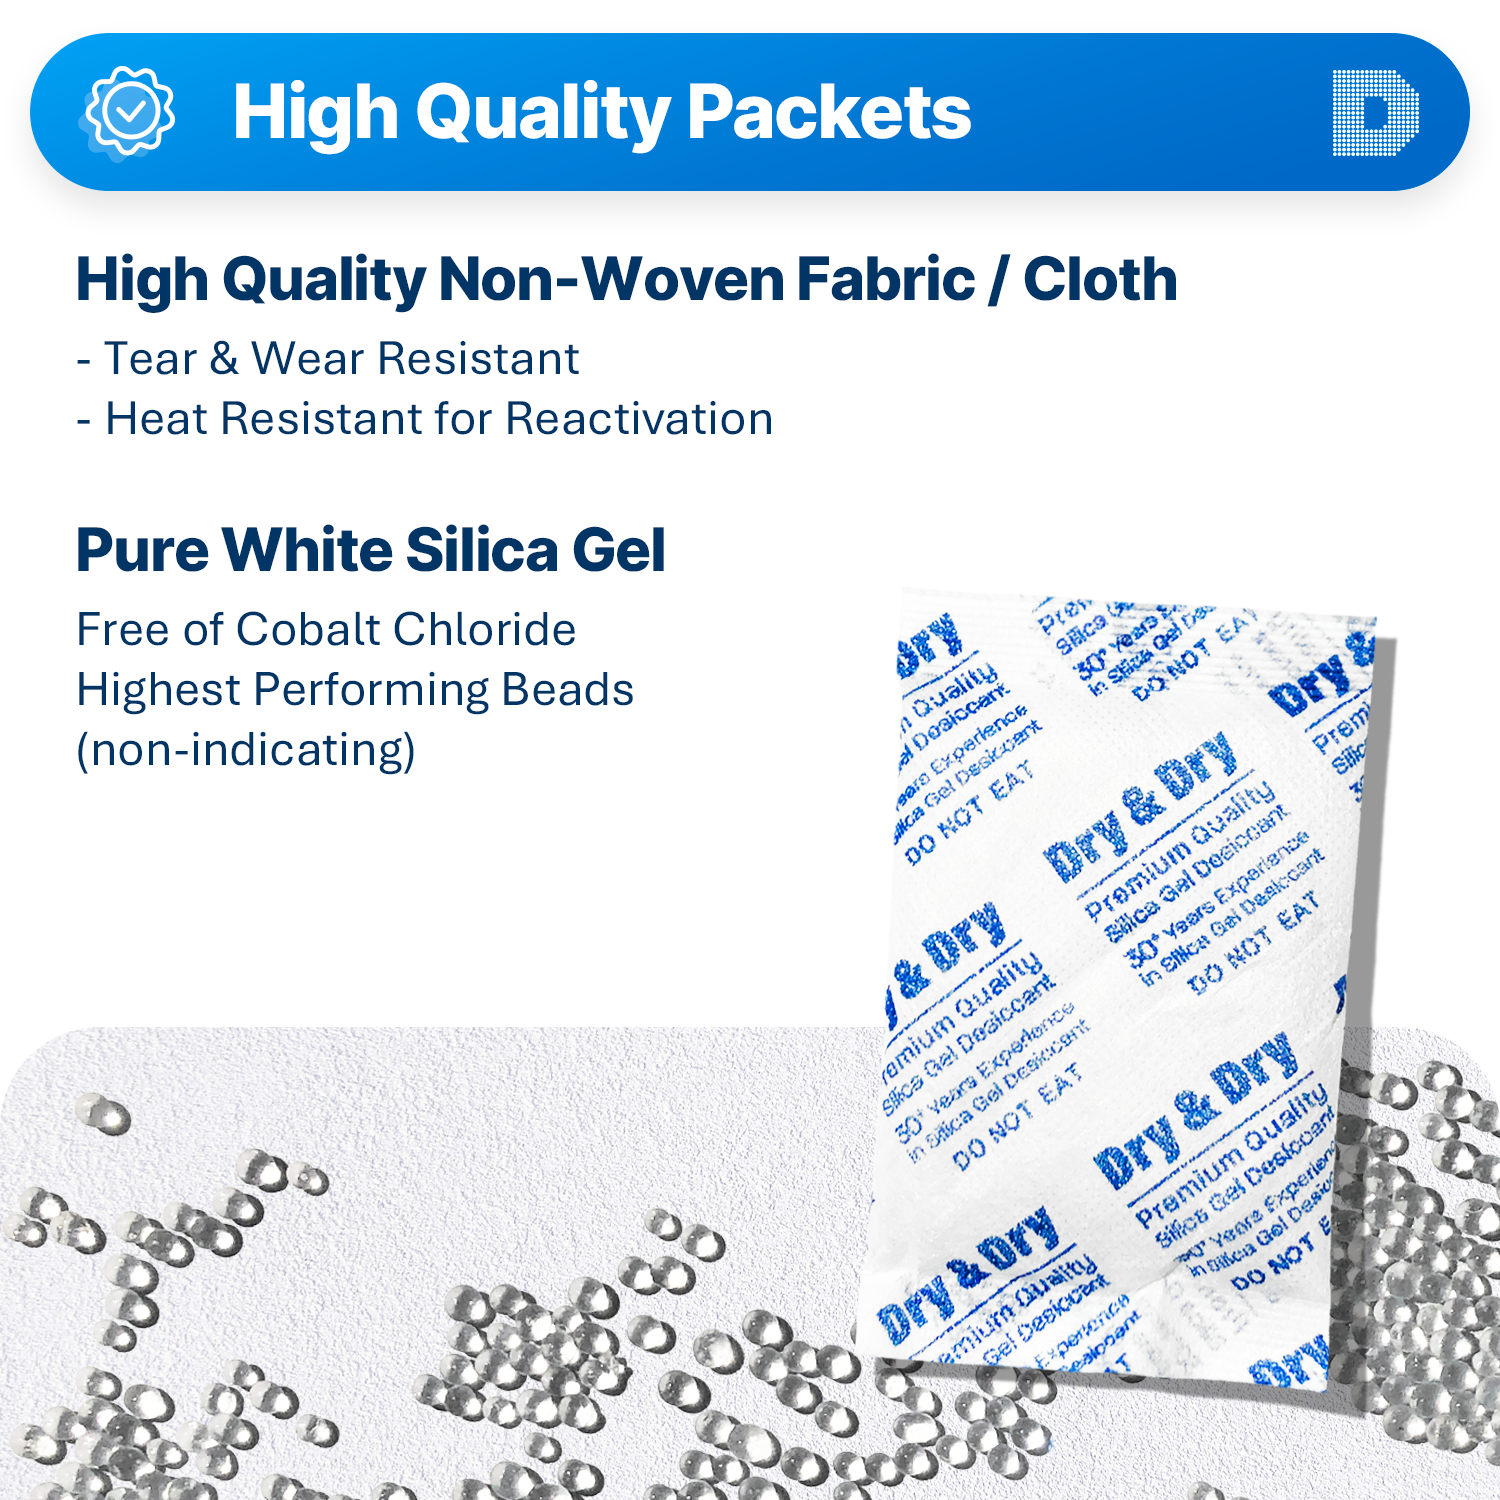 30 Gram Non-Woven Fabric(Cloth) Packets